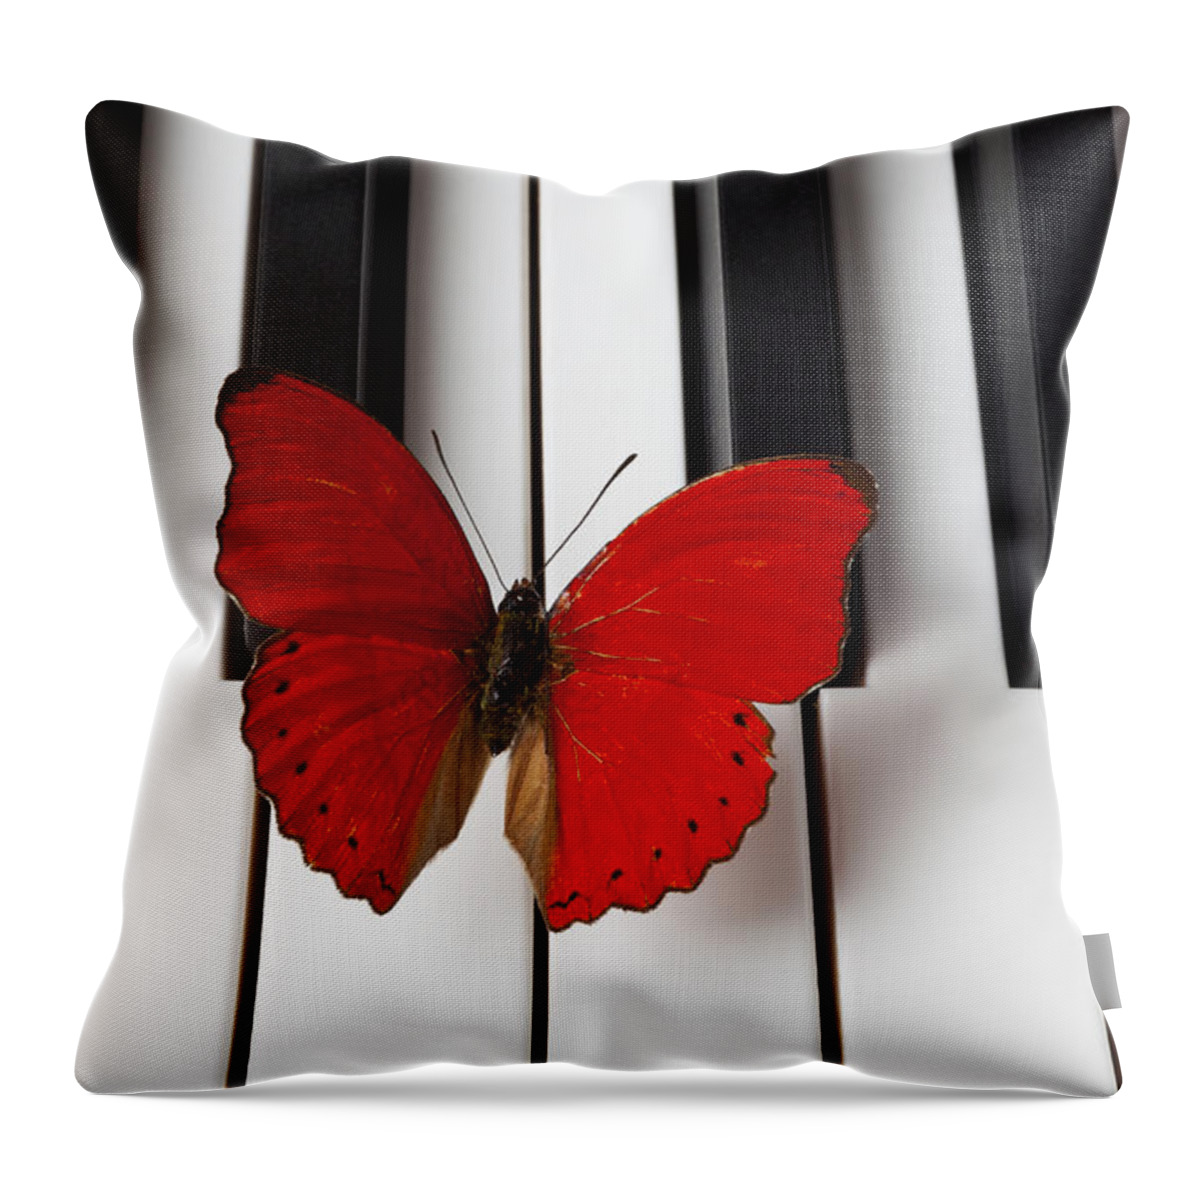 Red Butterfly Throw Pillow featuring the photograph Red Butterfly On Piano Keys by Garry Gay